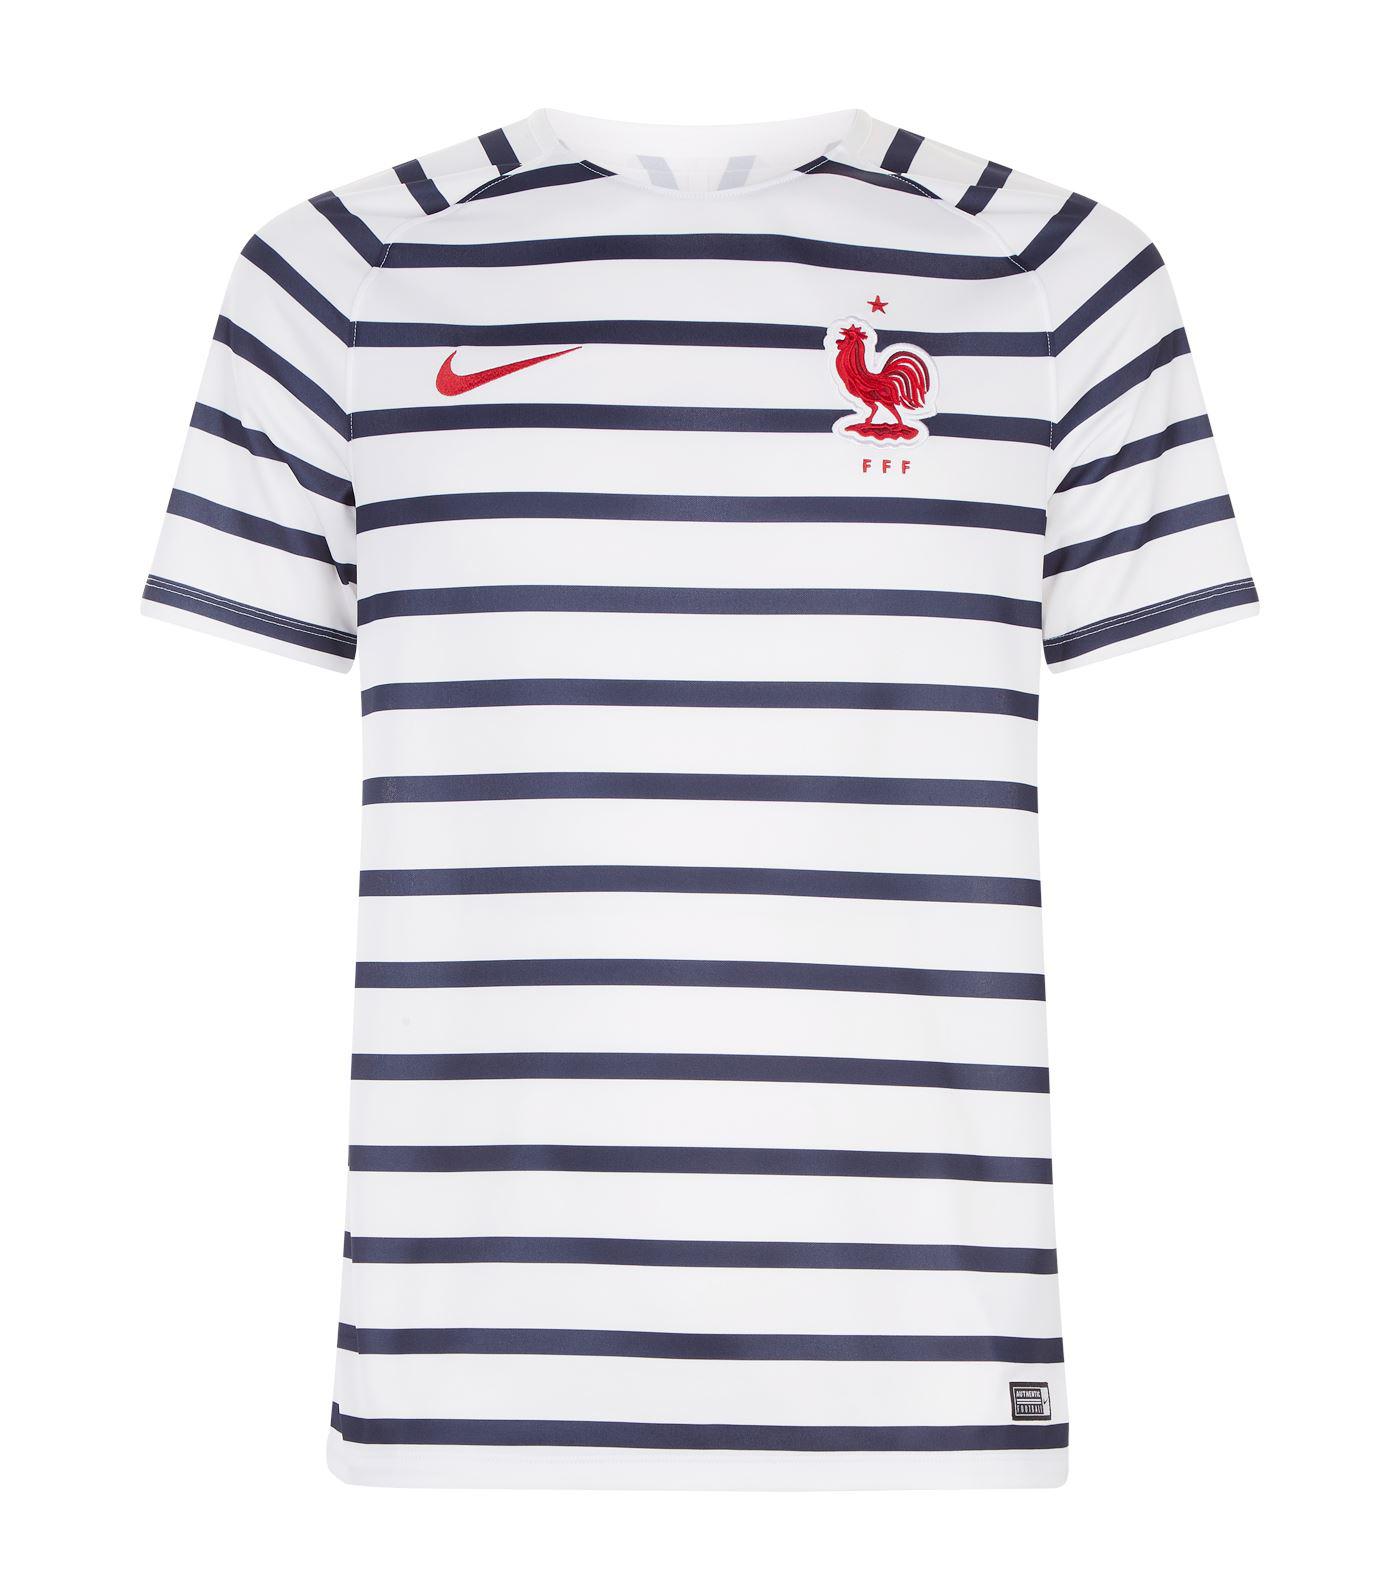 Nike Fff Dri-fit Squad Training Top in White for Men - Lyst